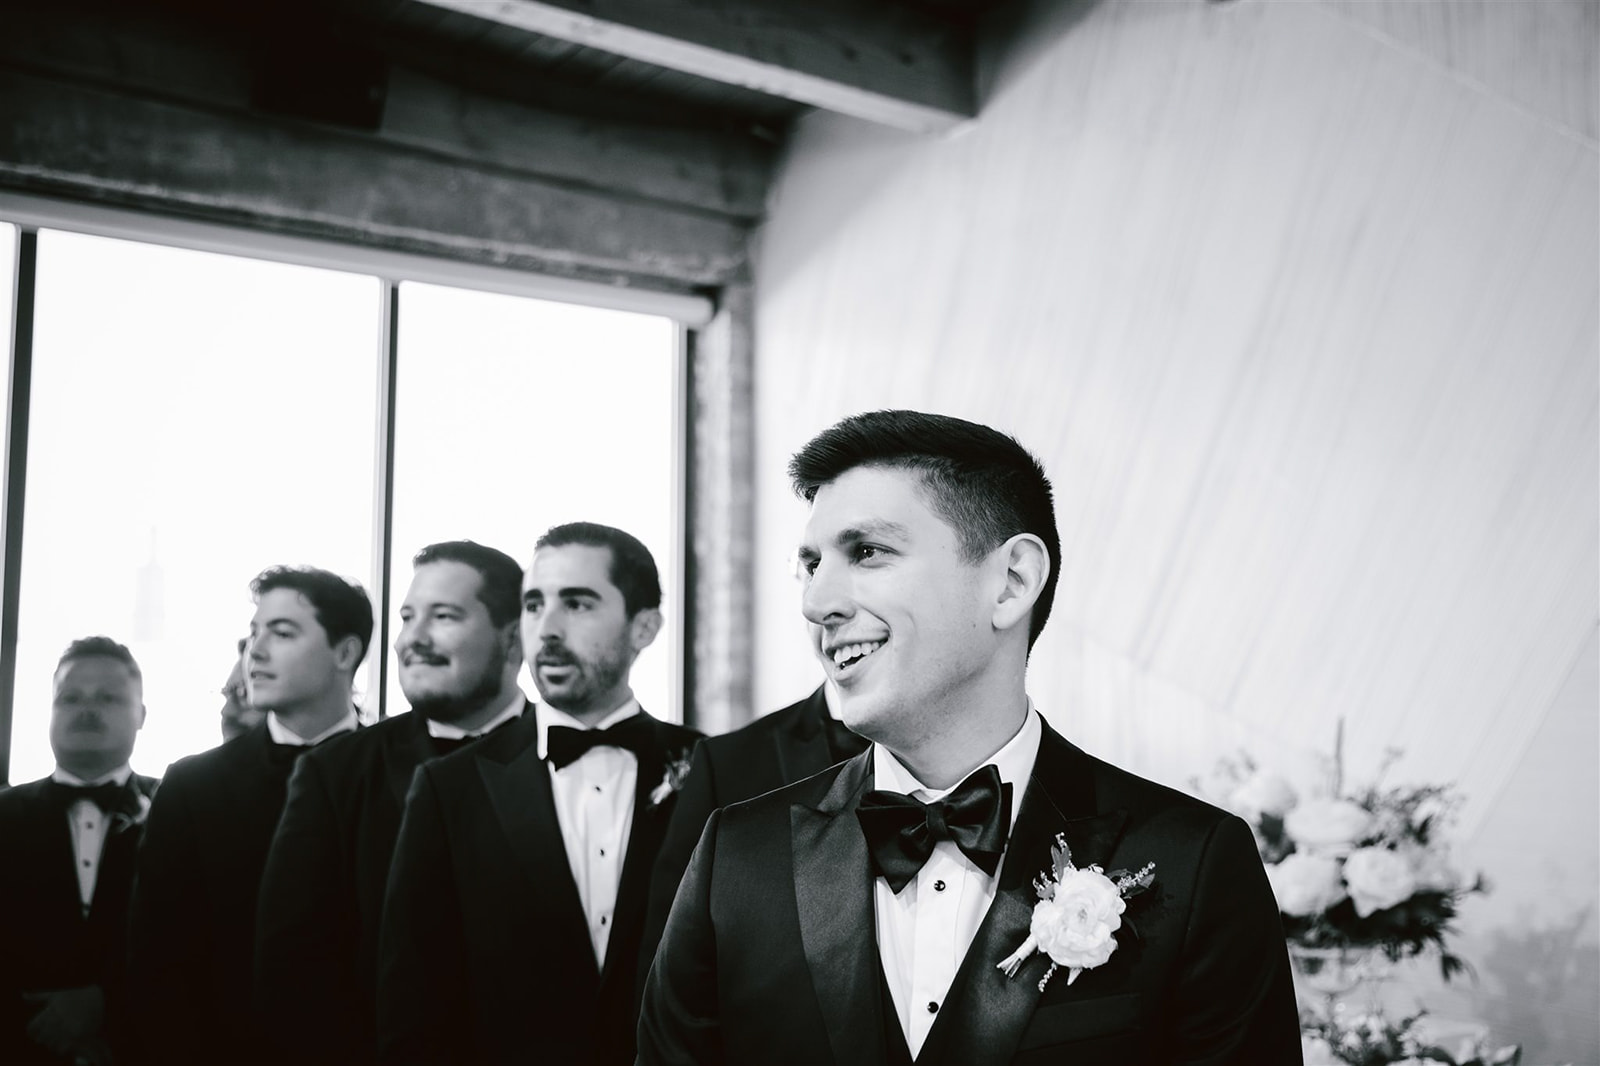 Groom's heartwarming reaction as he sees his bride walking down the aisle in a touching moment at Walden Chicago.